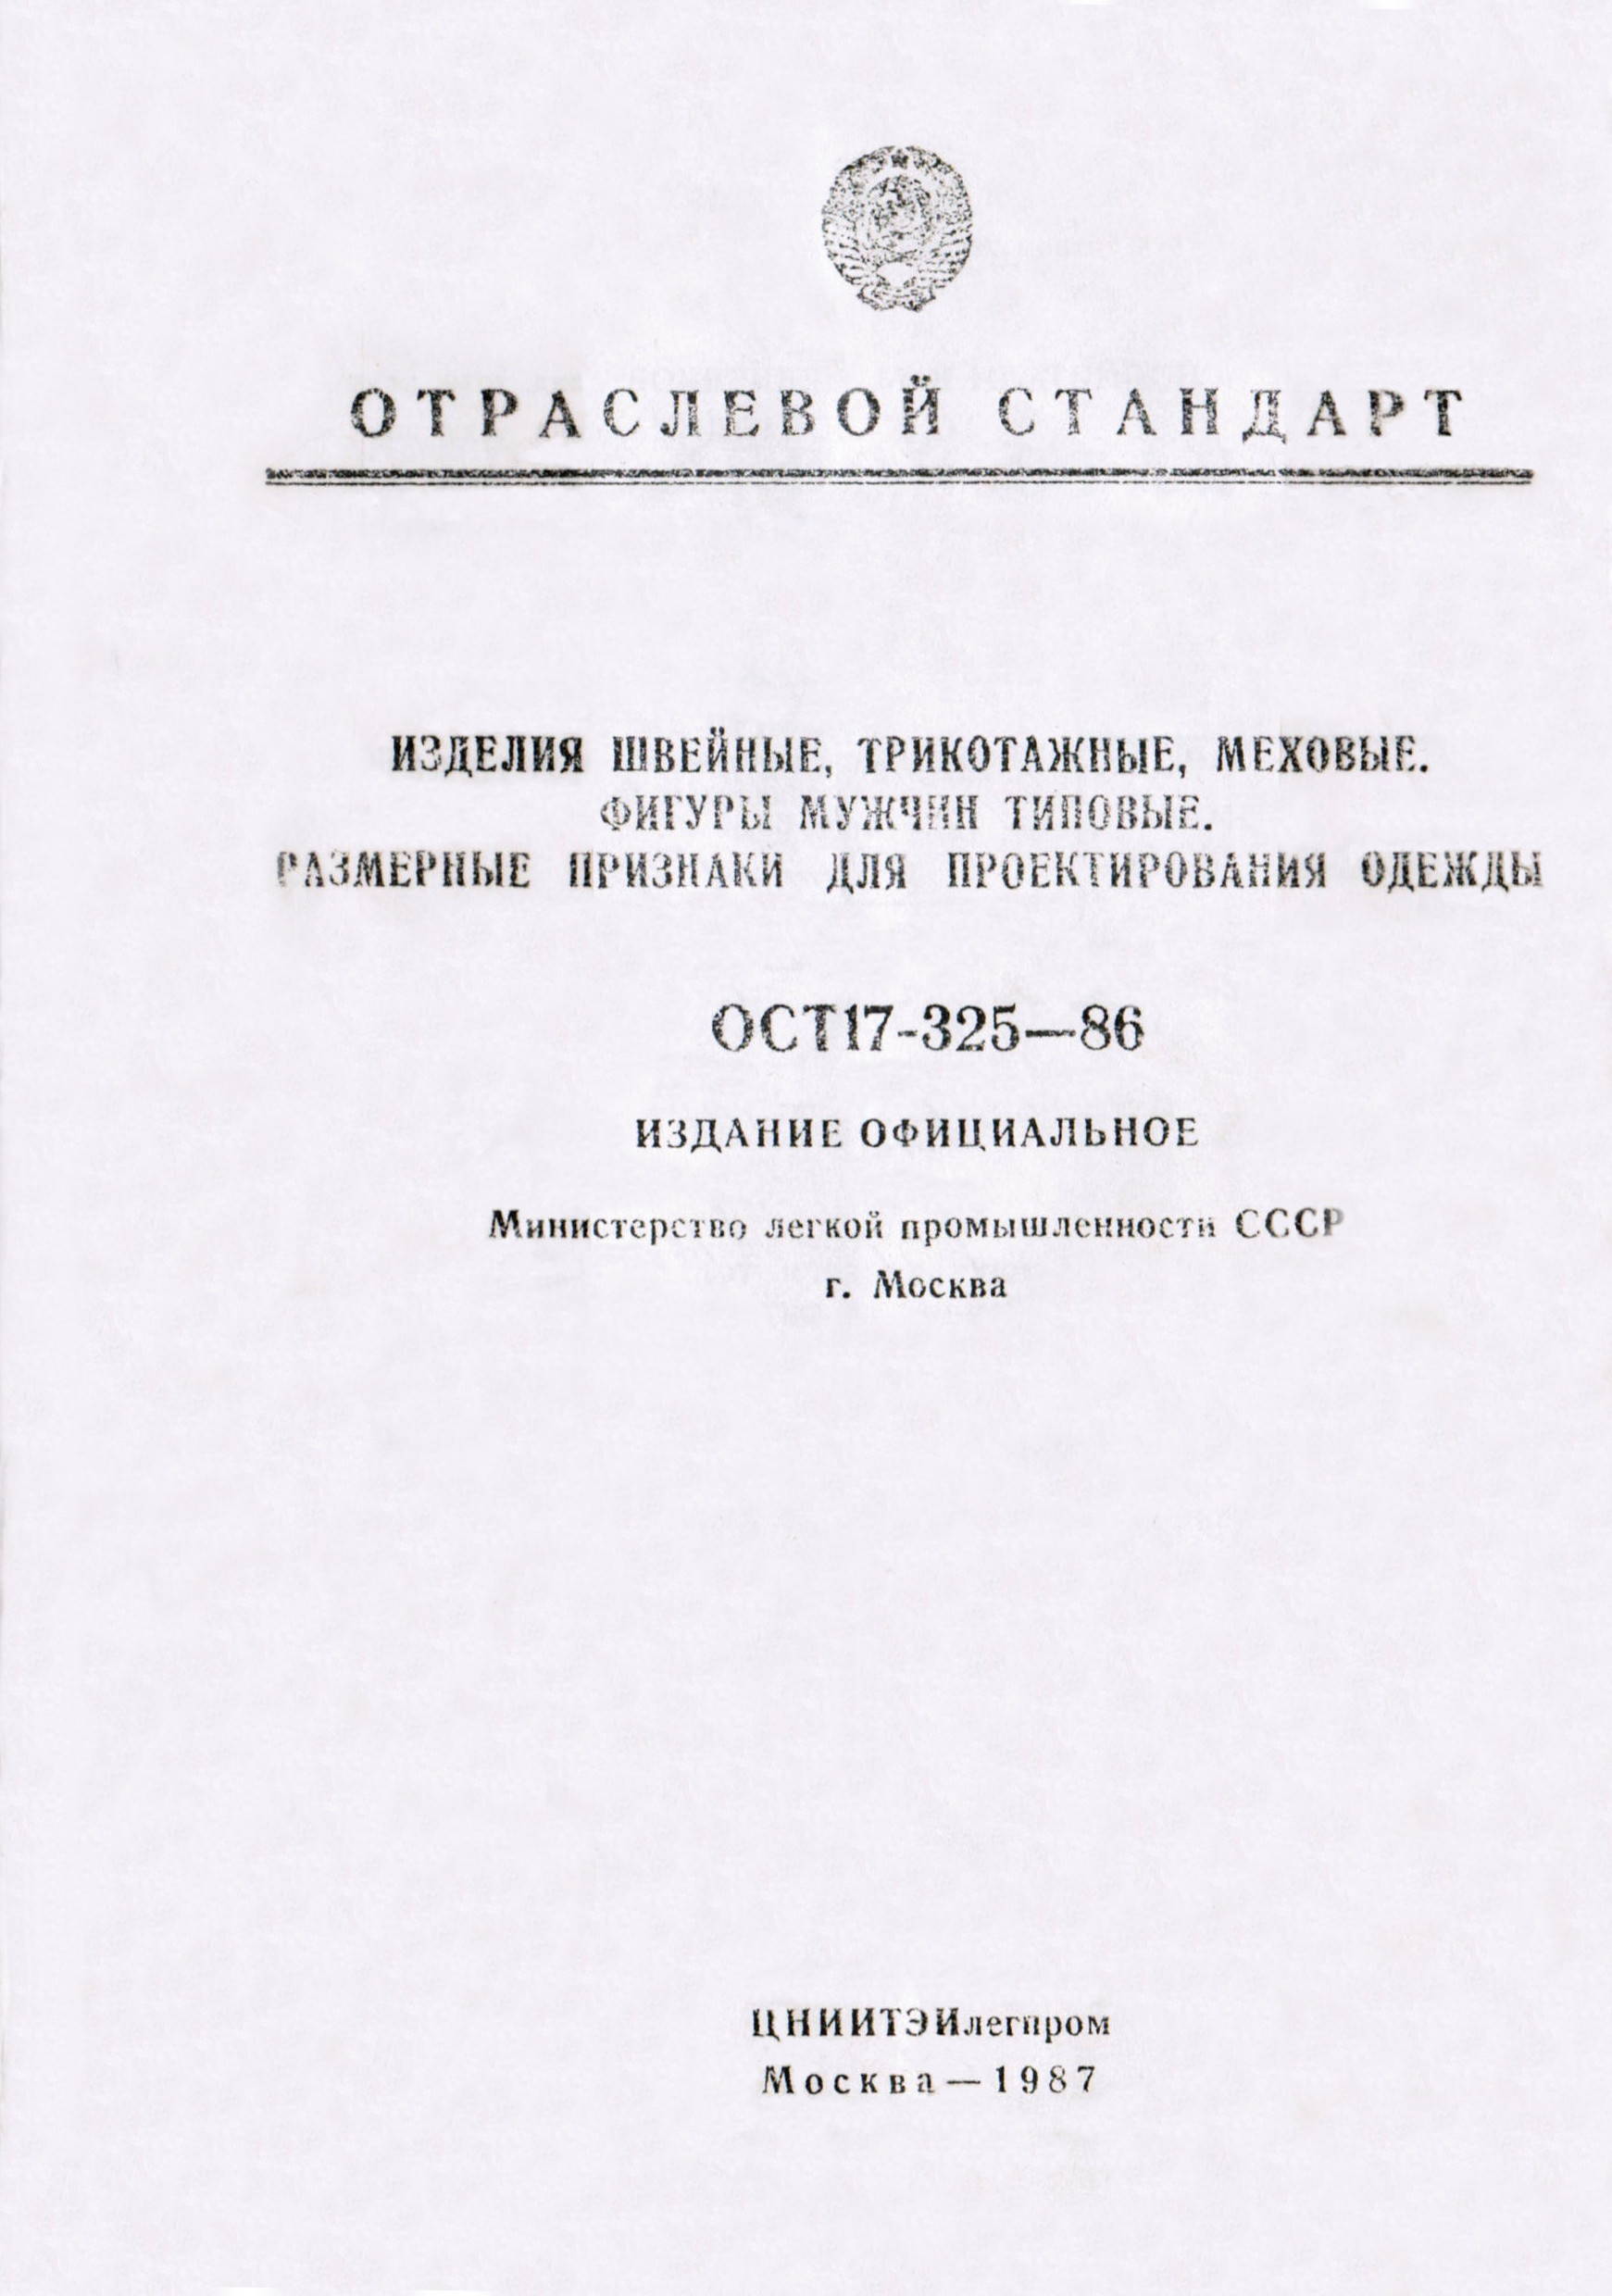 Collection of multisize tables (russian language)